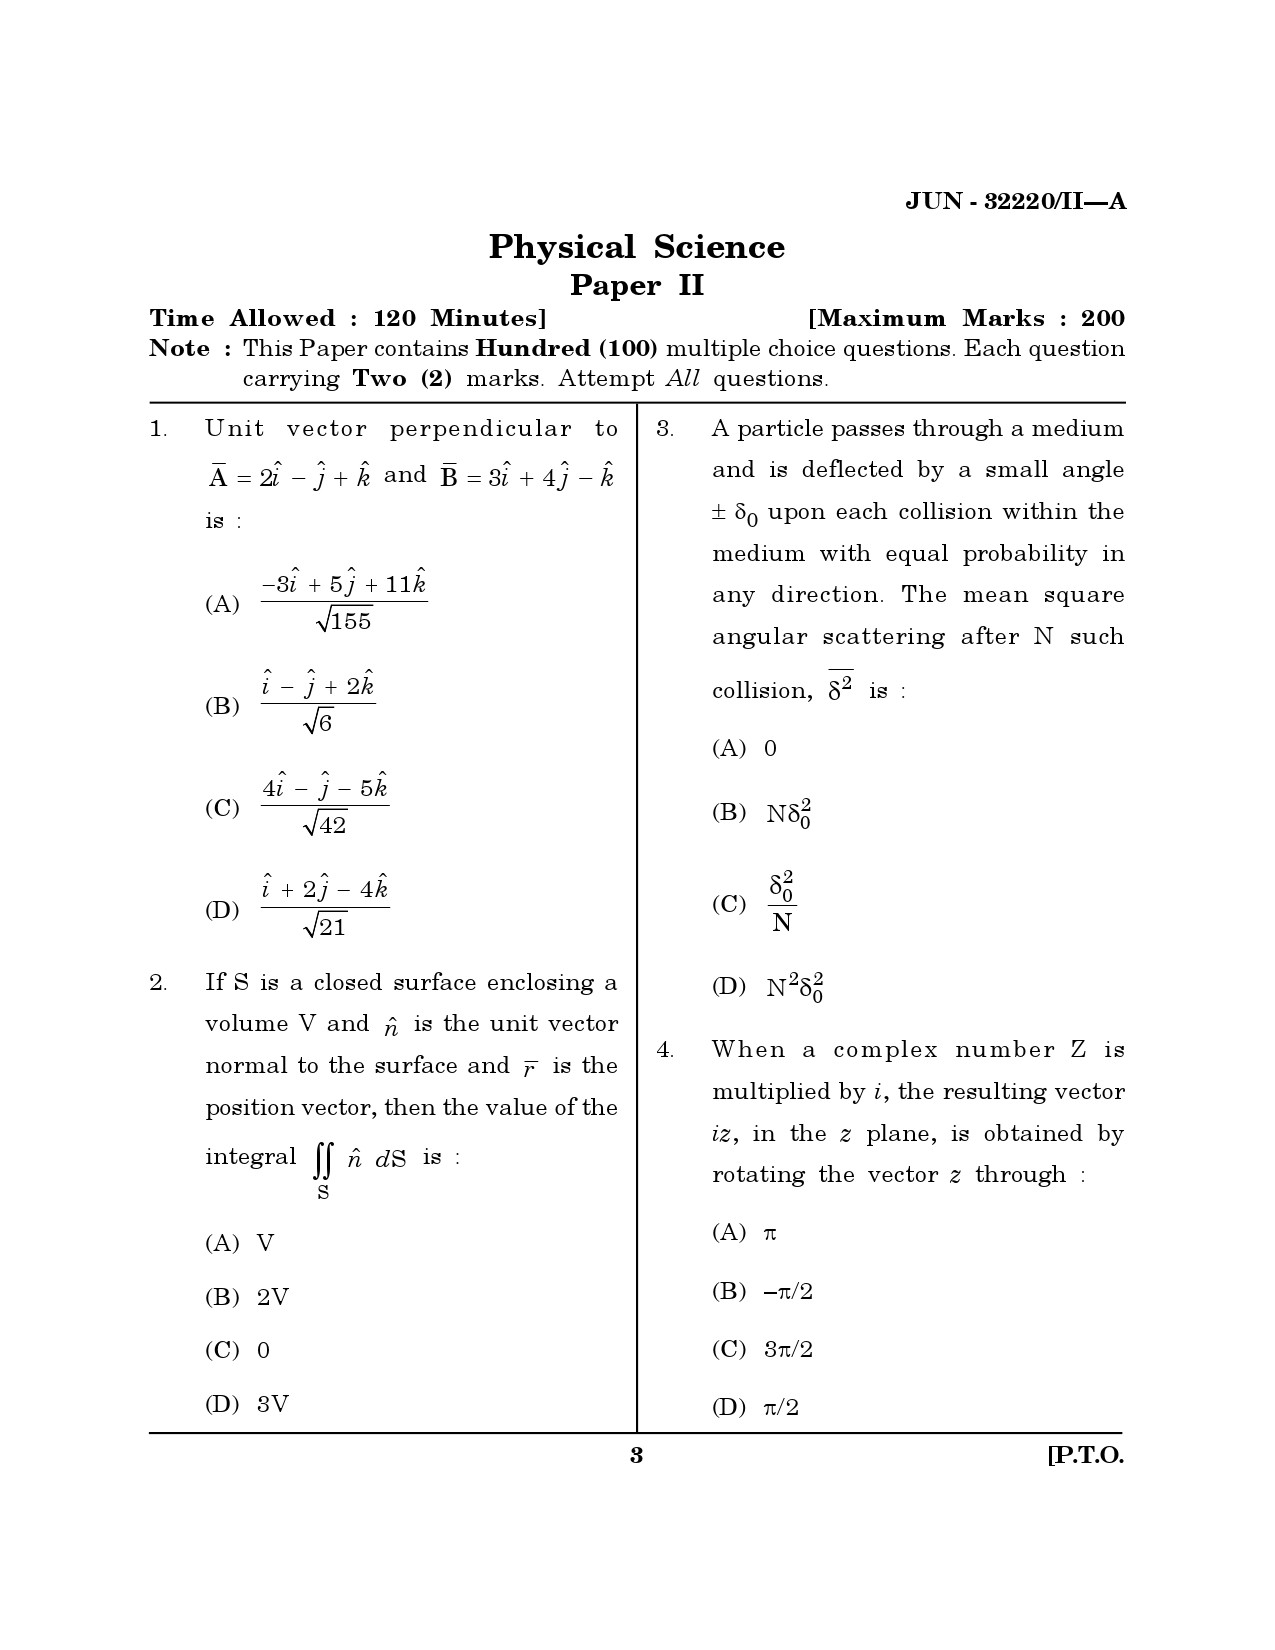 Maharashtra SET Physical Science Question Paper II June 2020 2